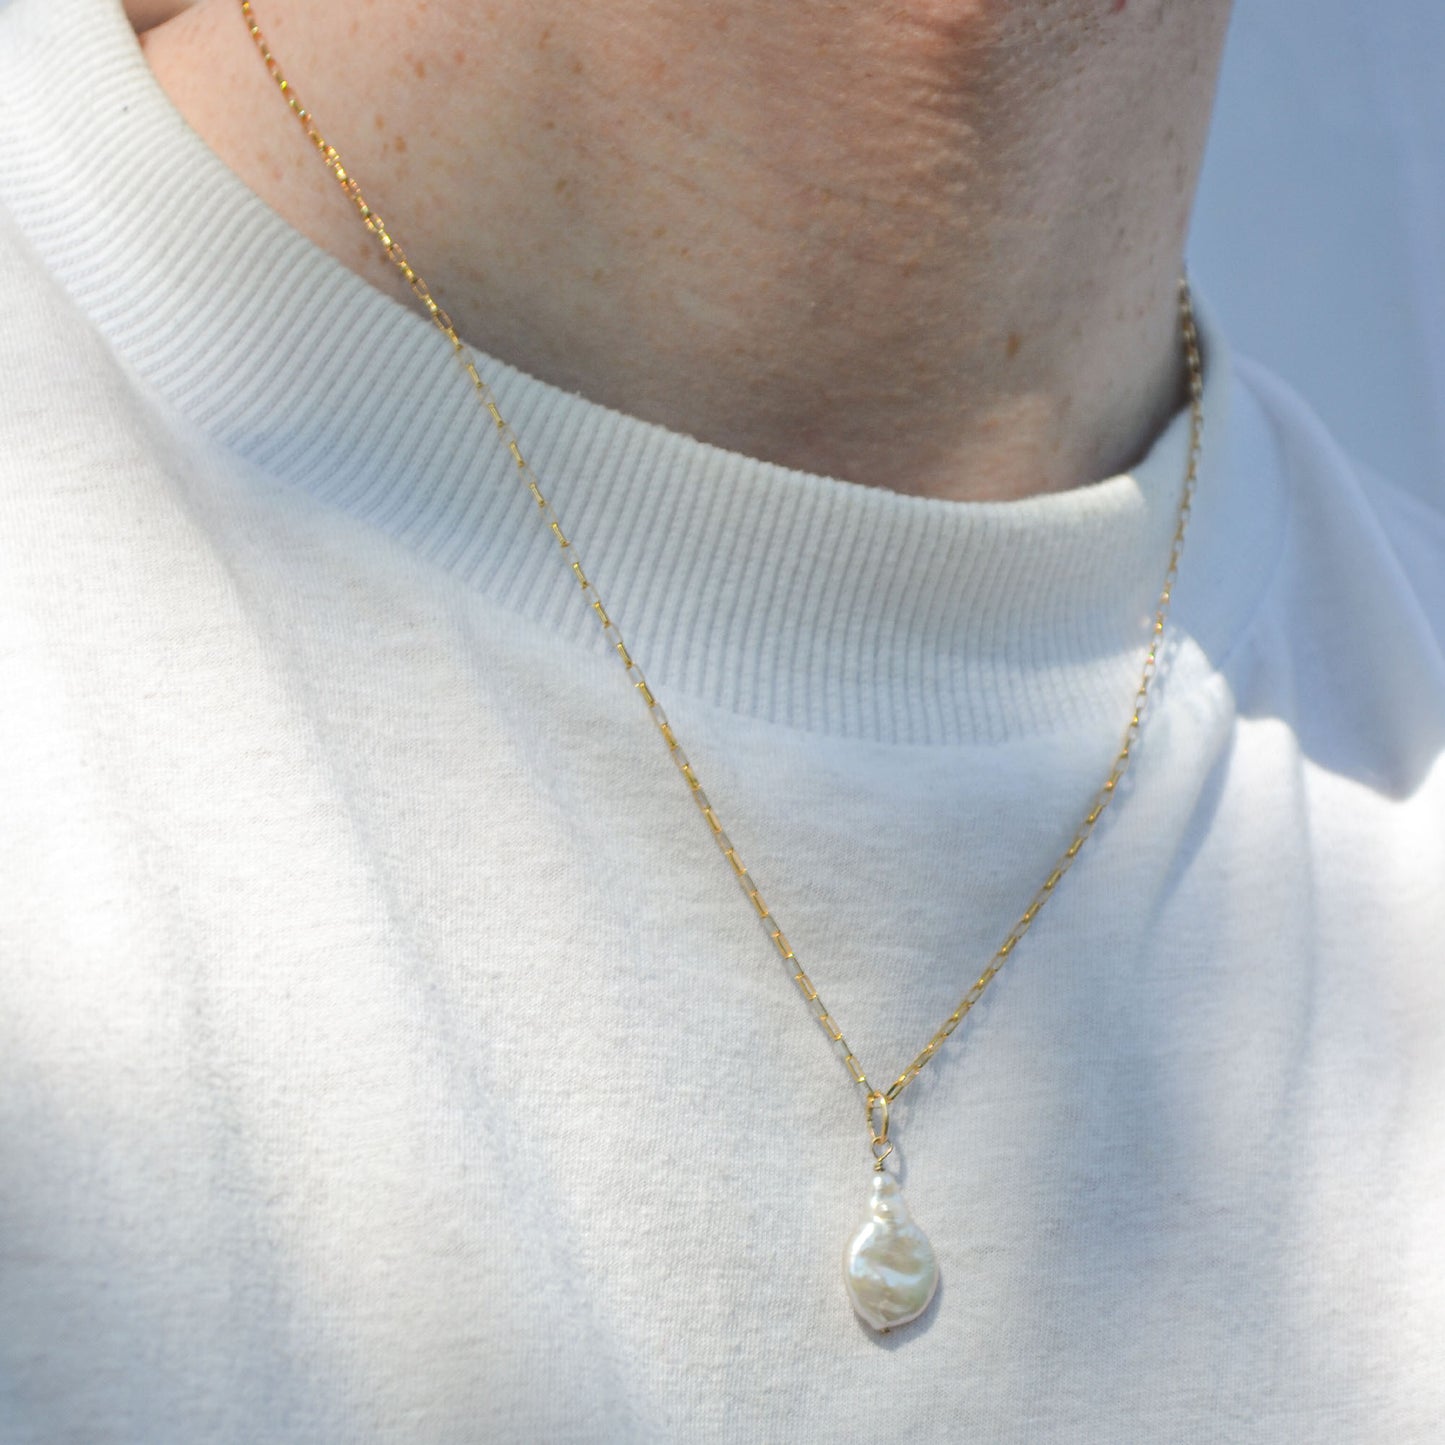 Rolo chain ketting gold filled voor mannen